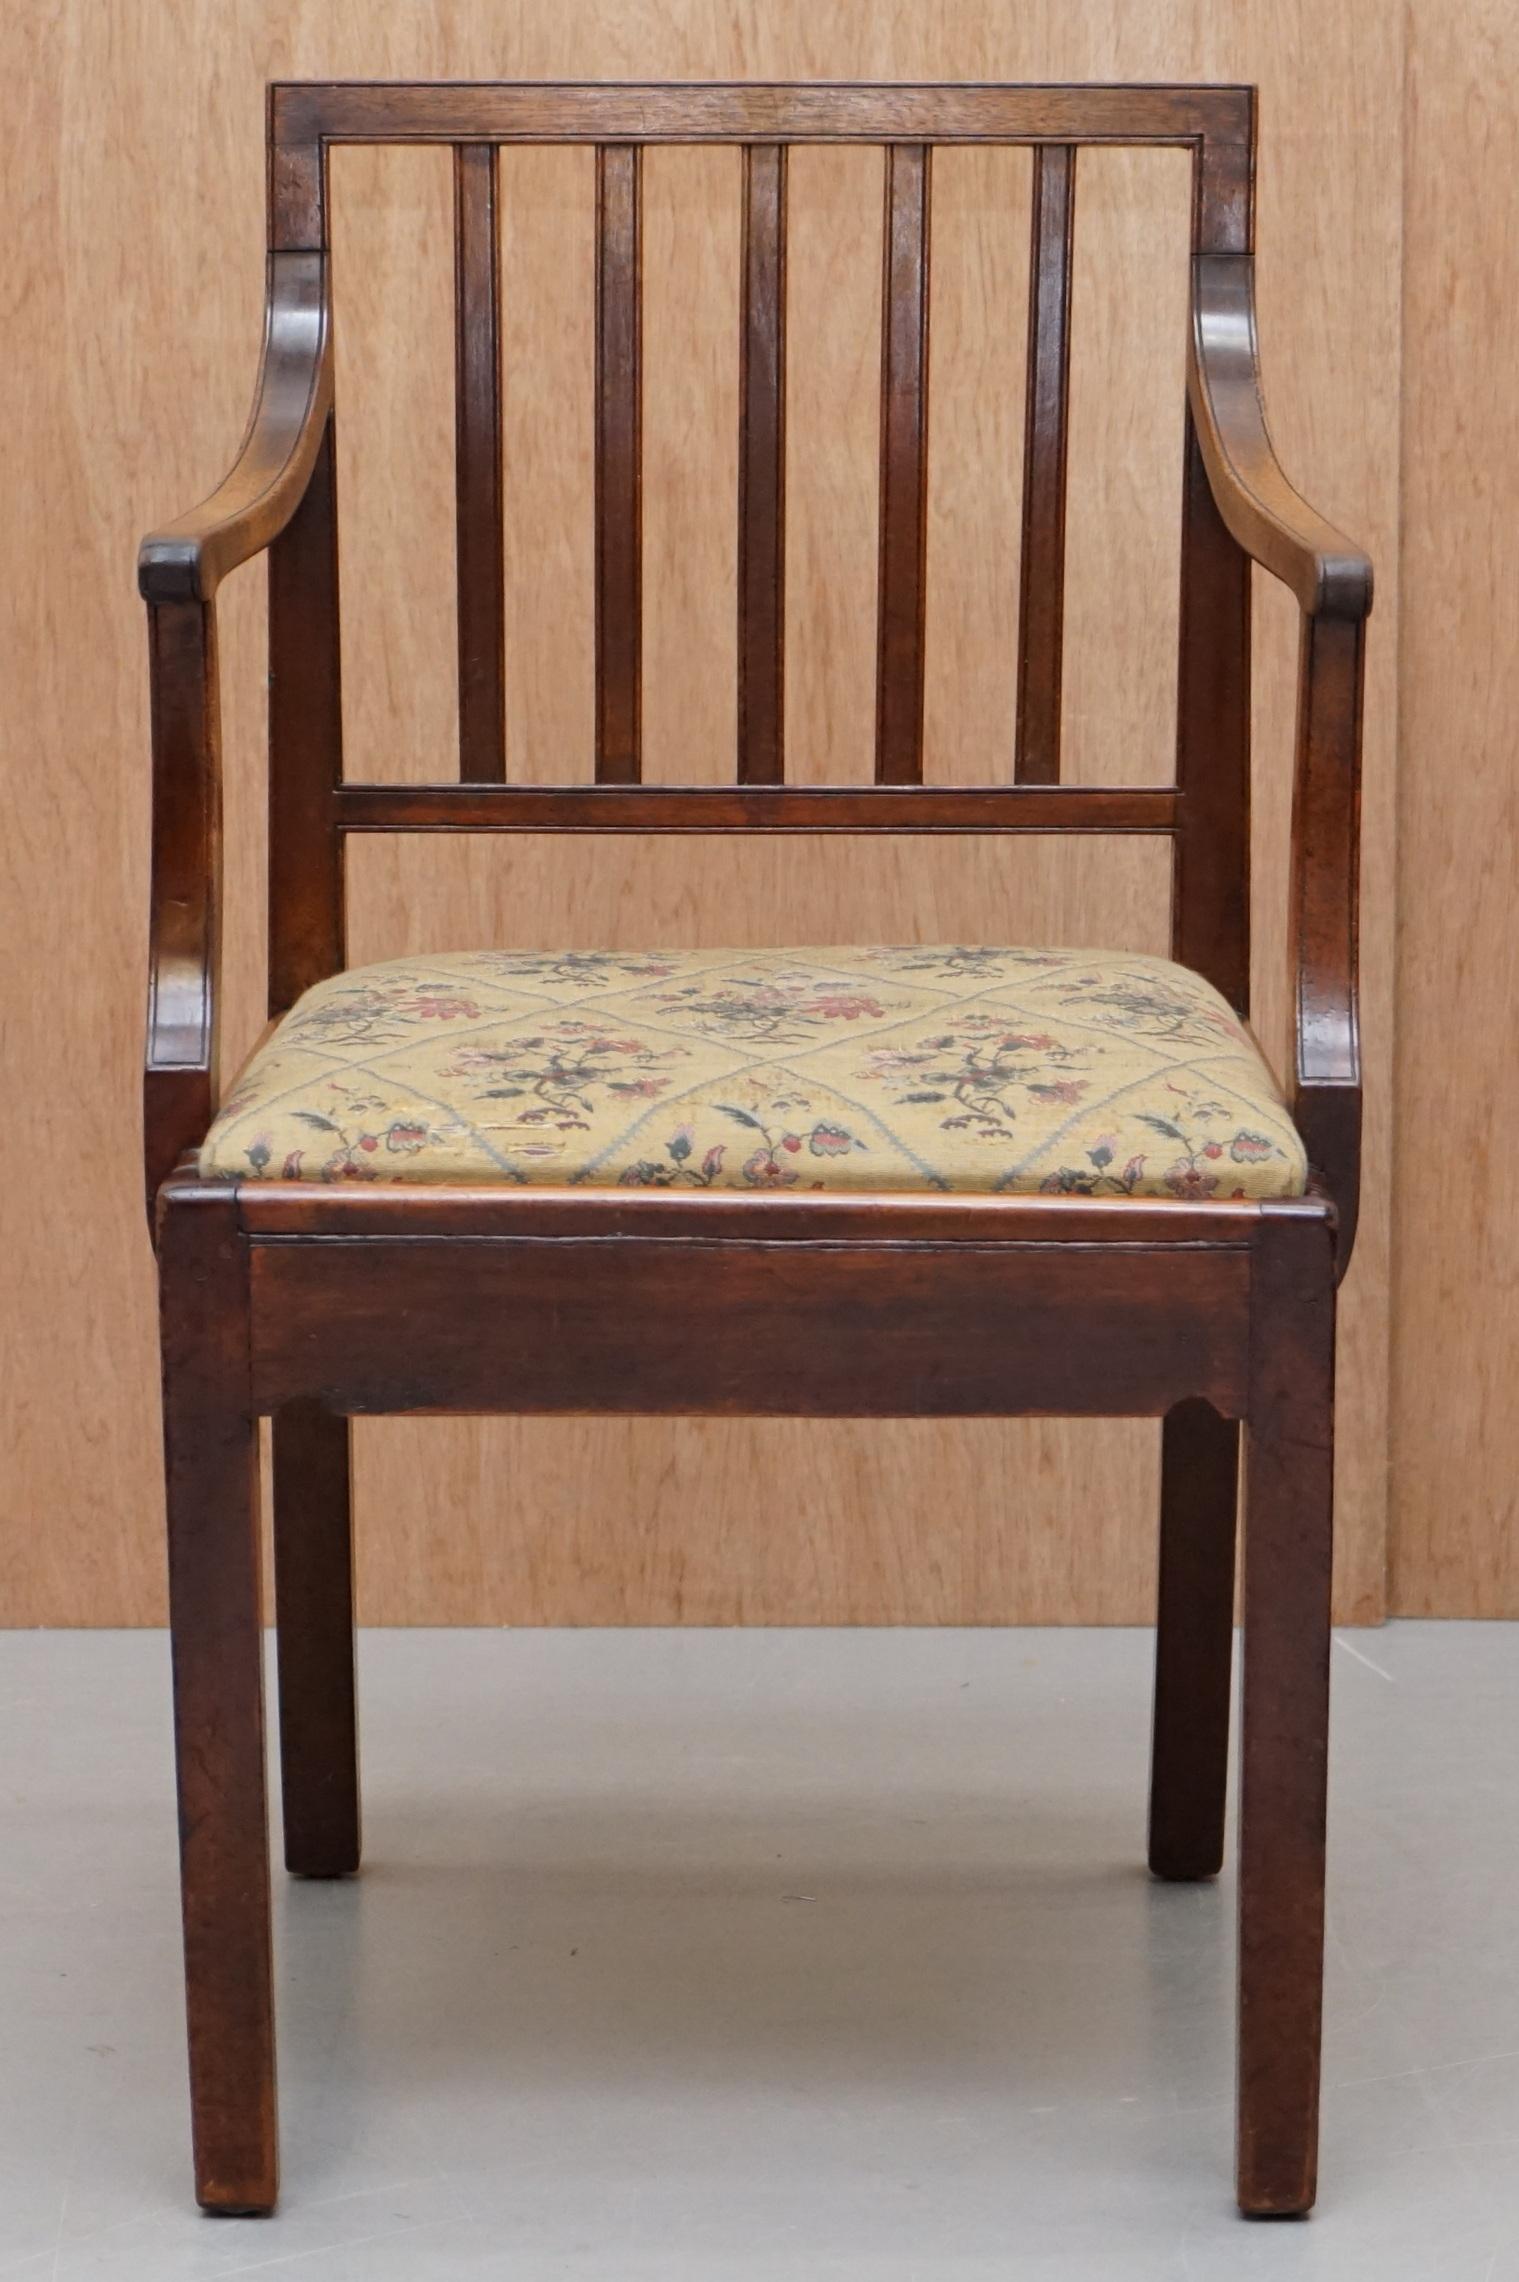 We are delighted to offer for sale this lovely Georgian period circa 1780 walnut frame carver armchair 

A very good looking and well made chair, all the joints are dowelled, hand carved and cut, it’s a good early piece and in walnut which is a